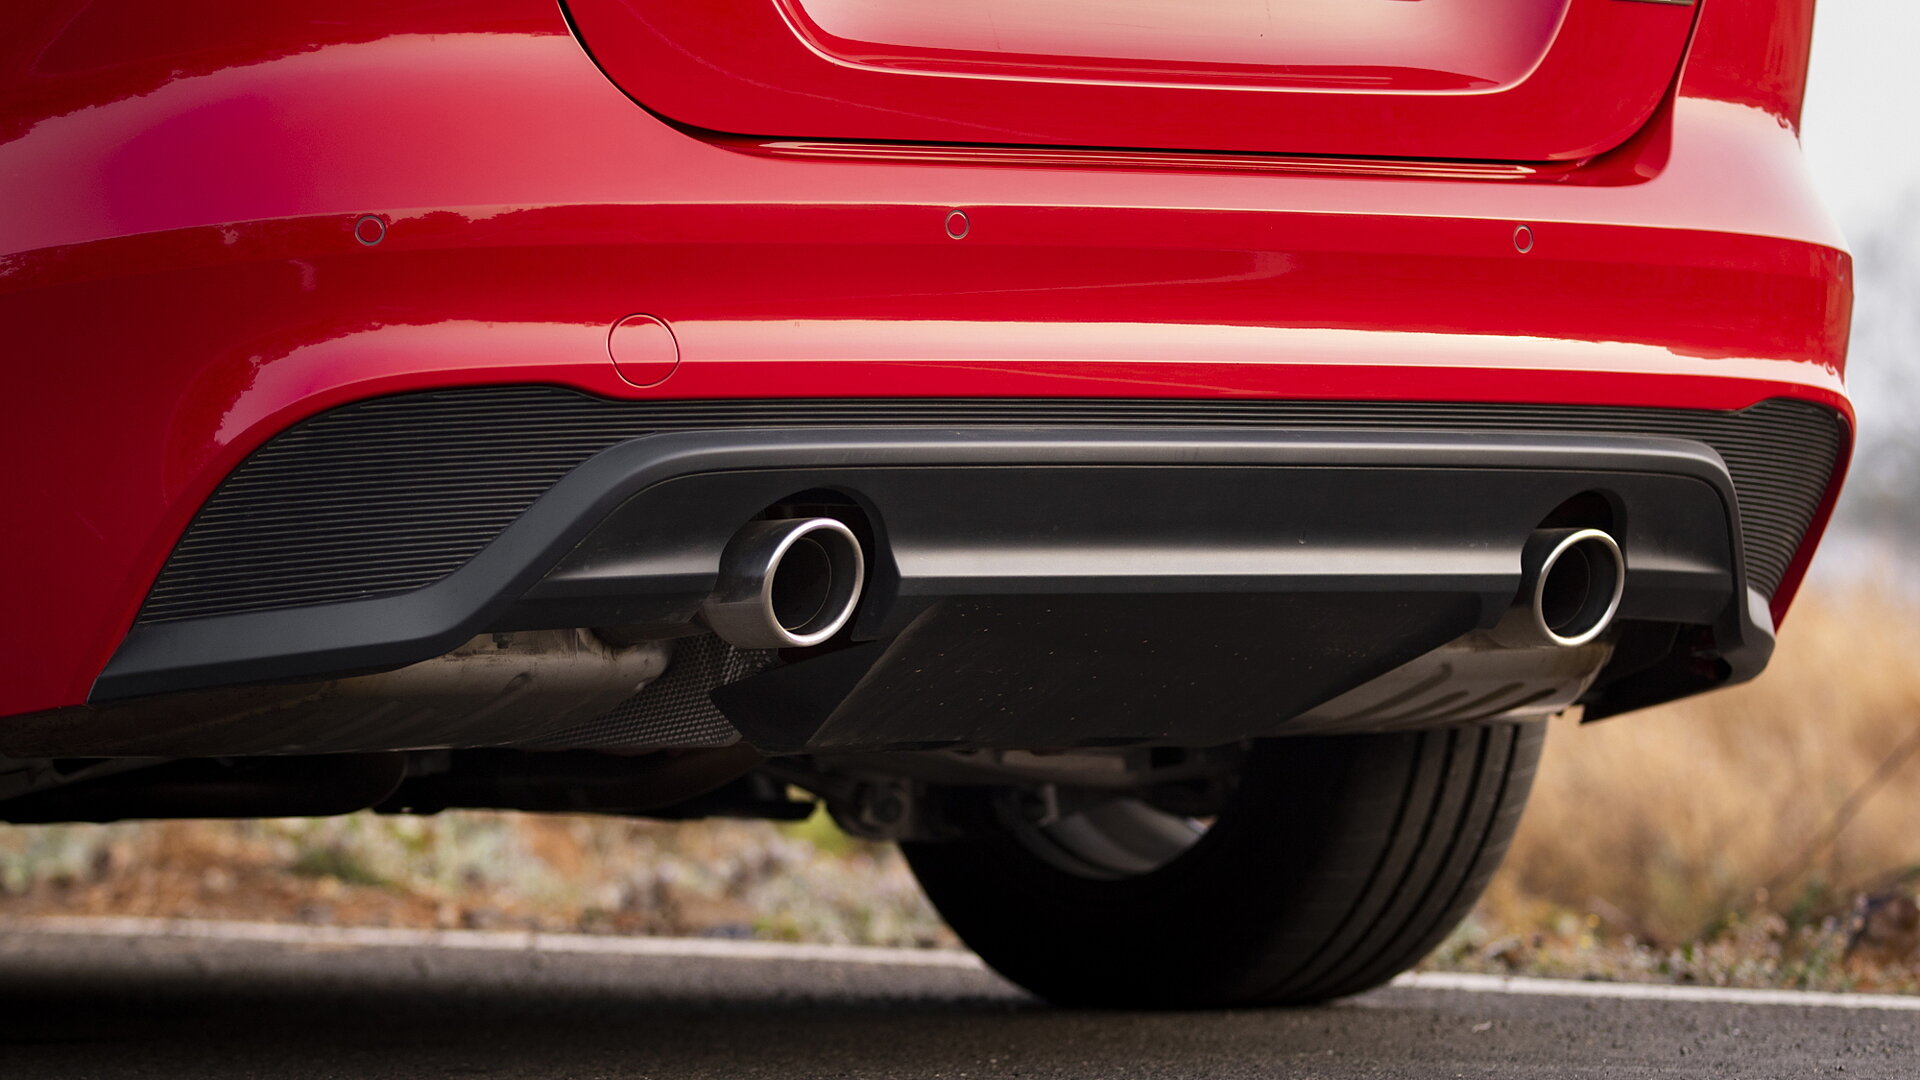 XE Exhaust Image, XE Photos in India - CarWale